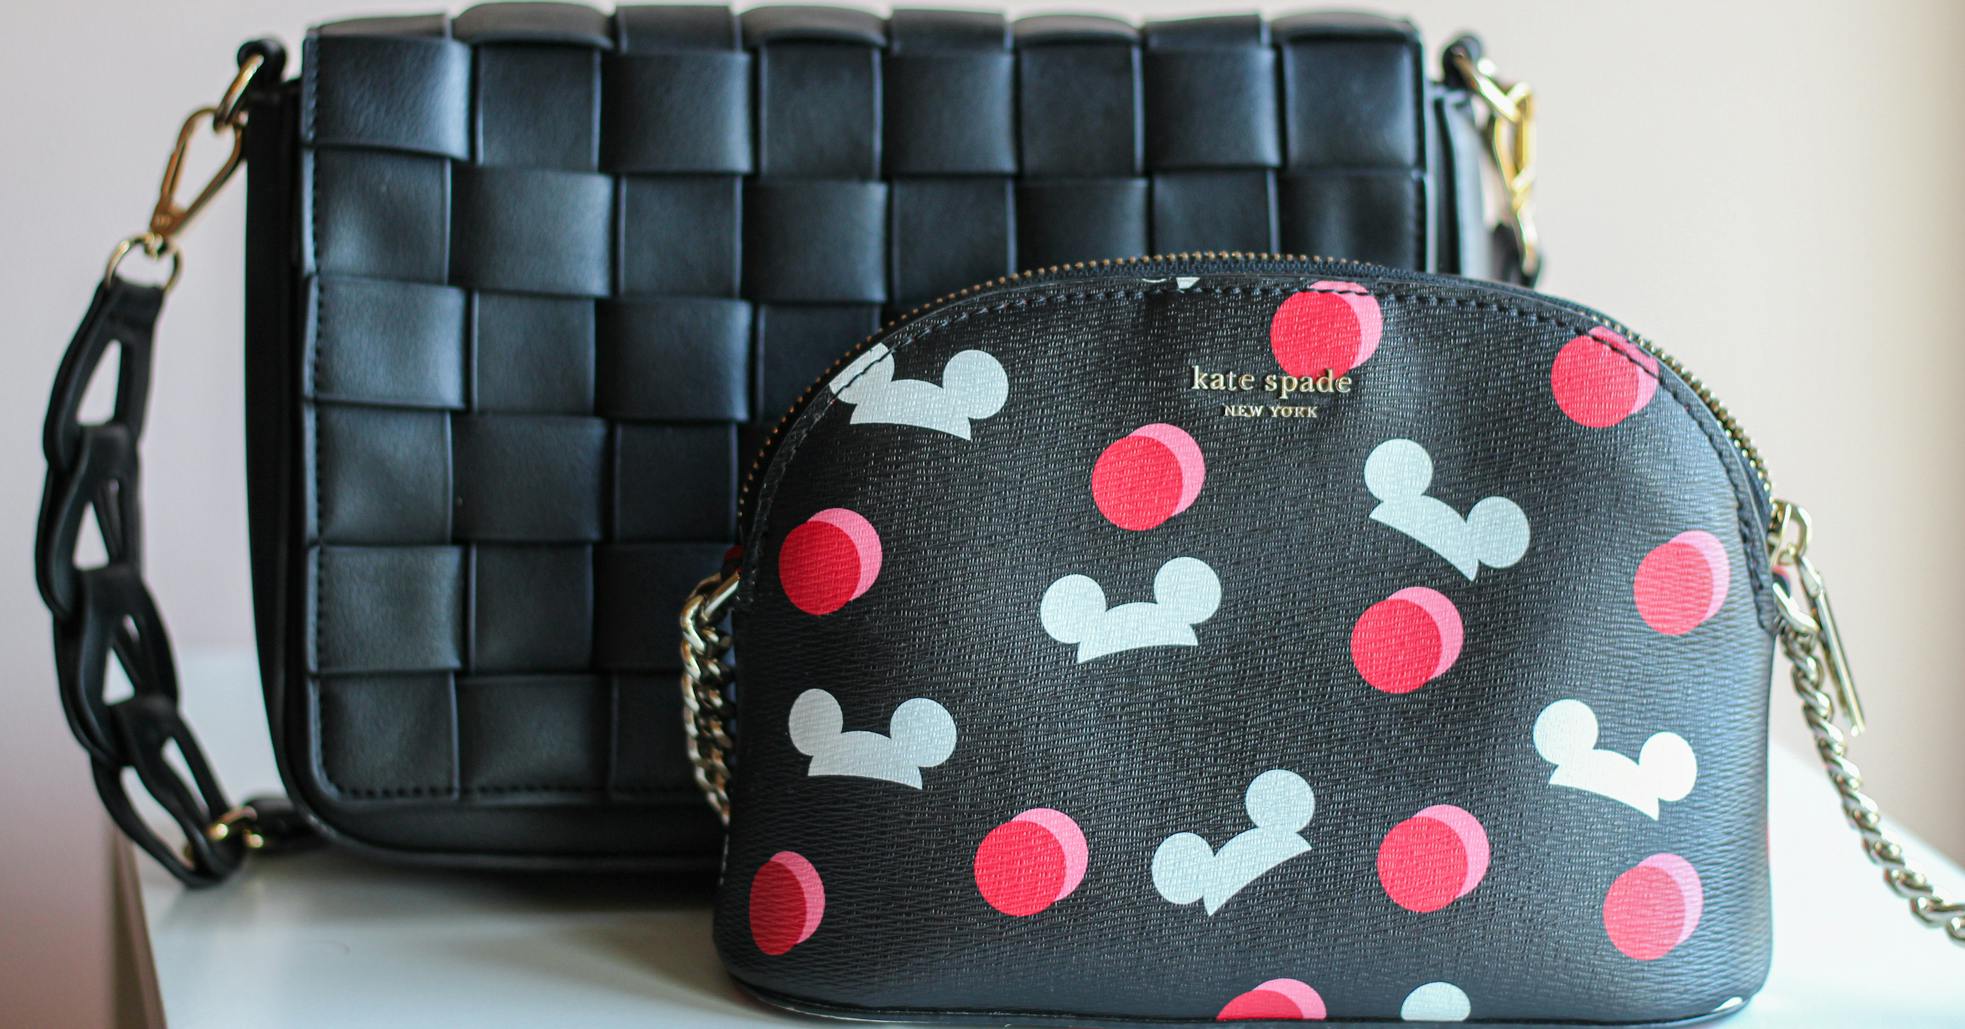 Kate Spade Surprise Sale: Here's How It Works - The Krazy Coupon Lady